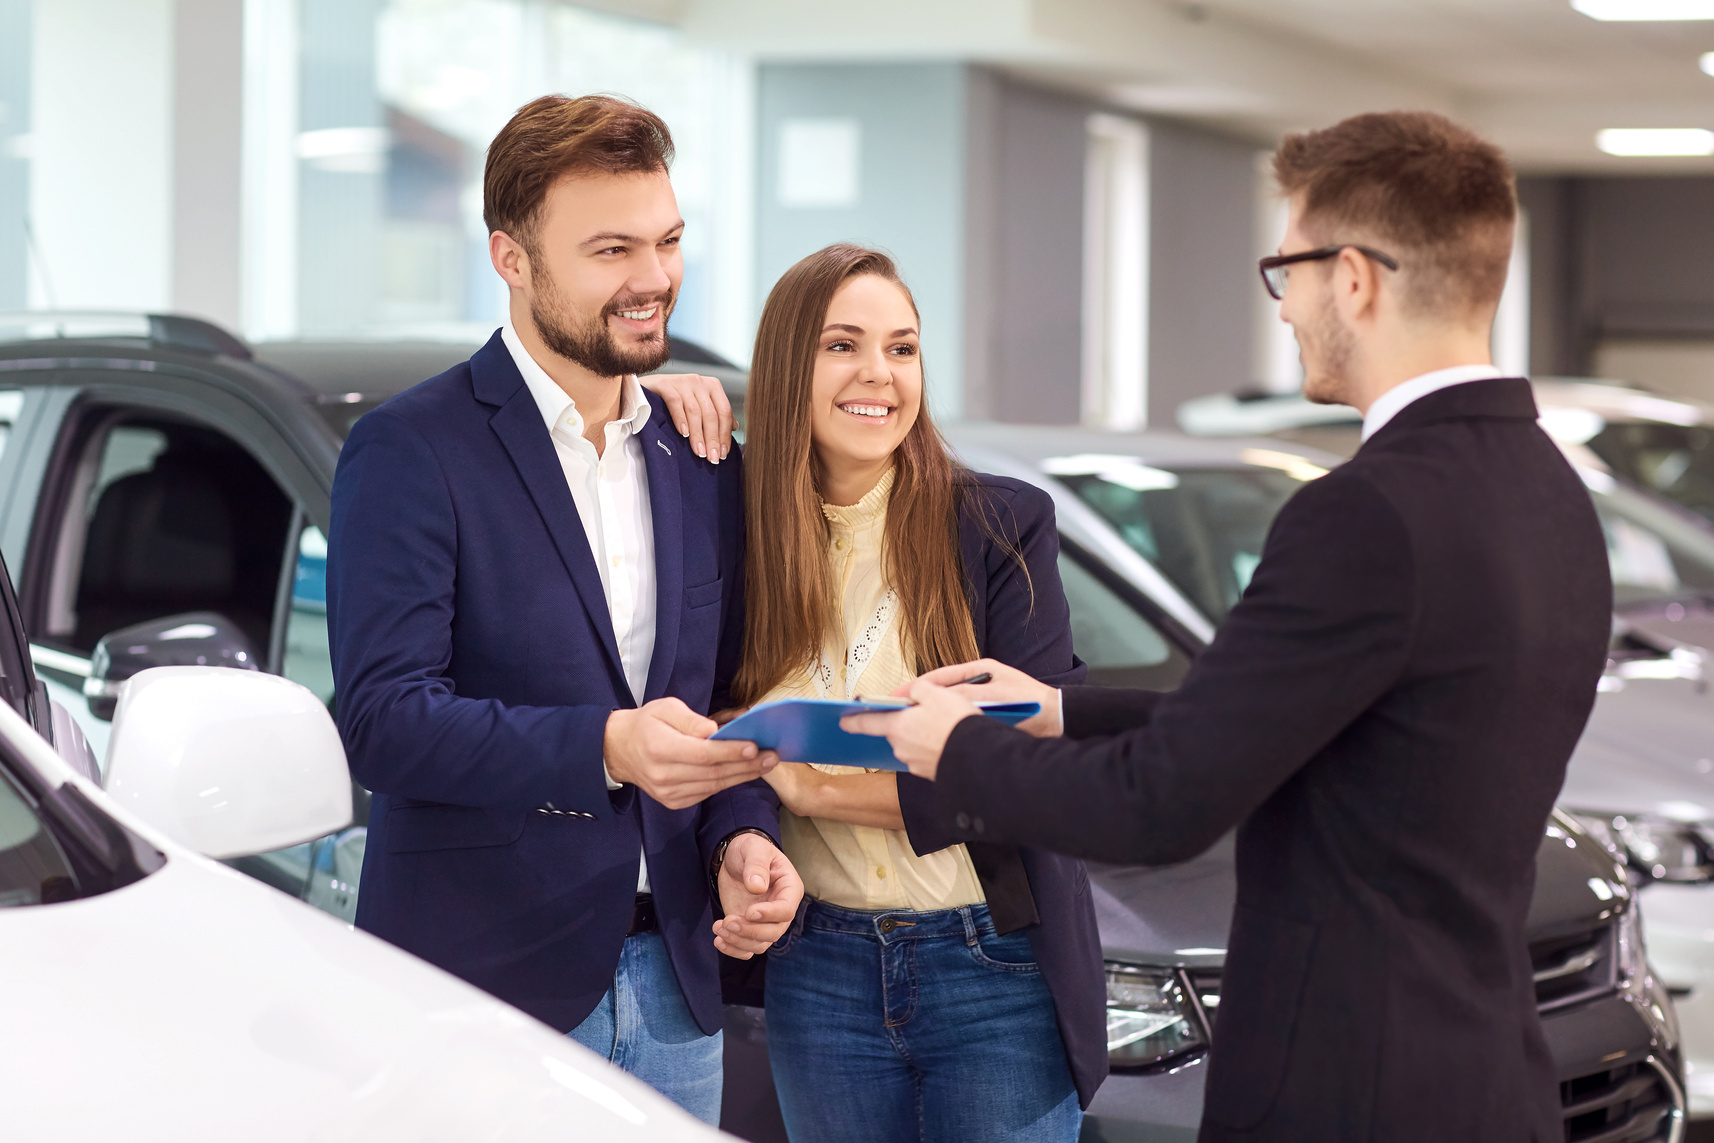 Sale, Rental Cars. a Car Dealer Sells Cars to Customers.